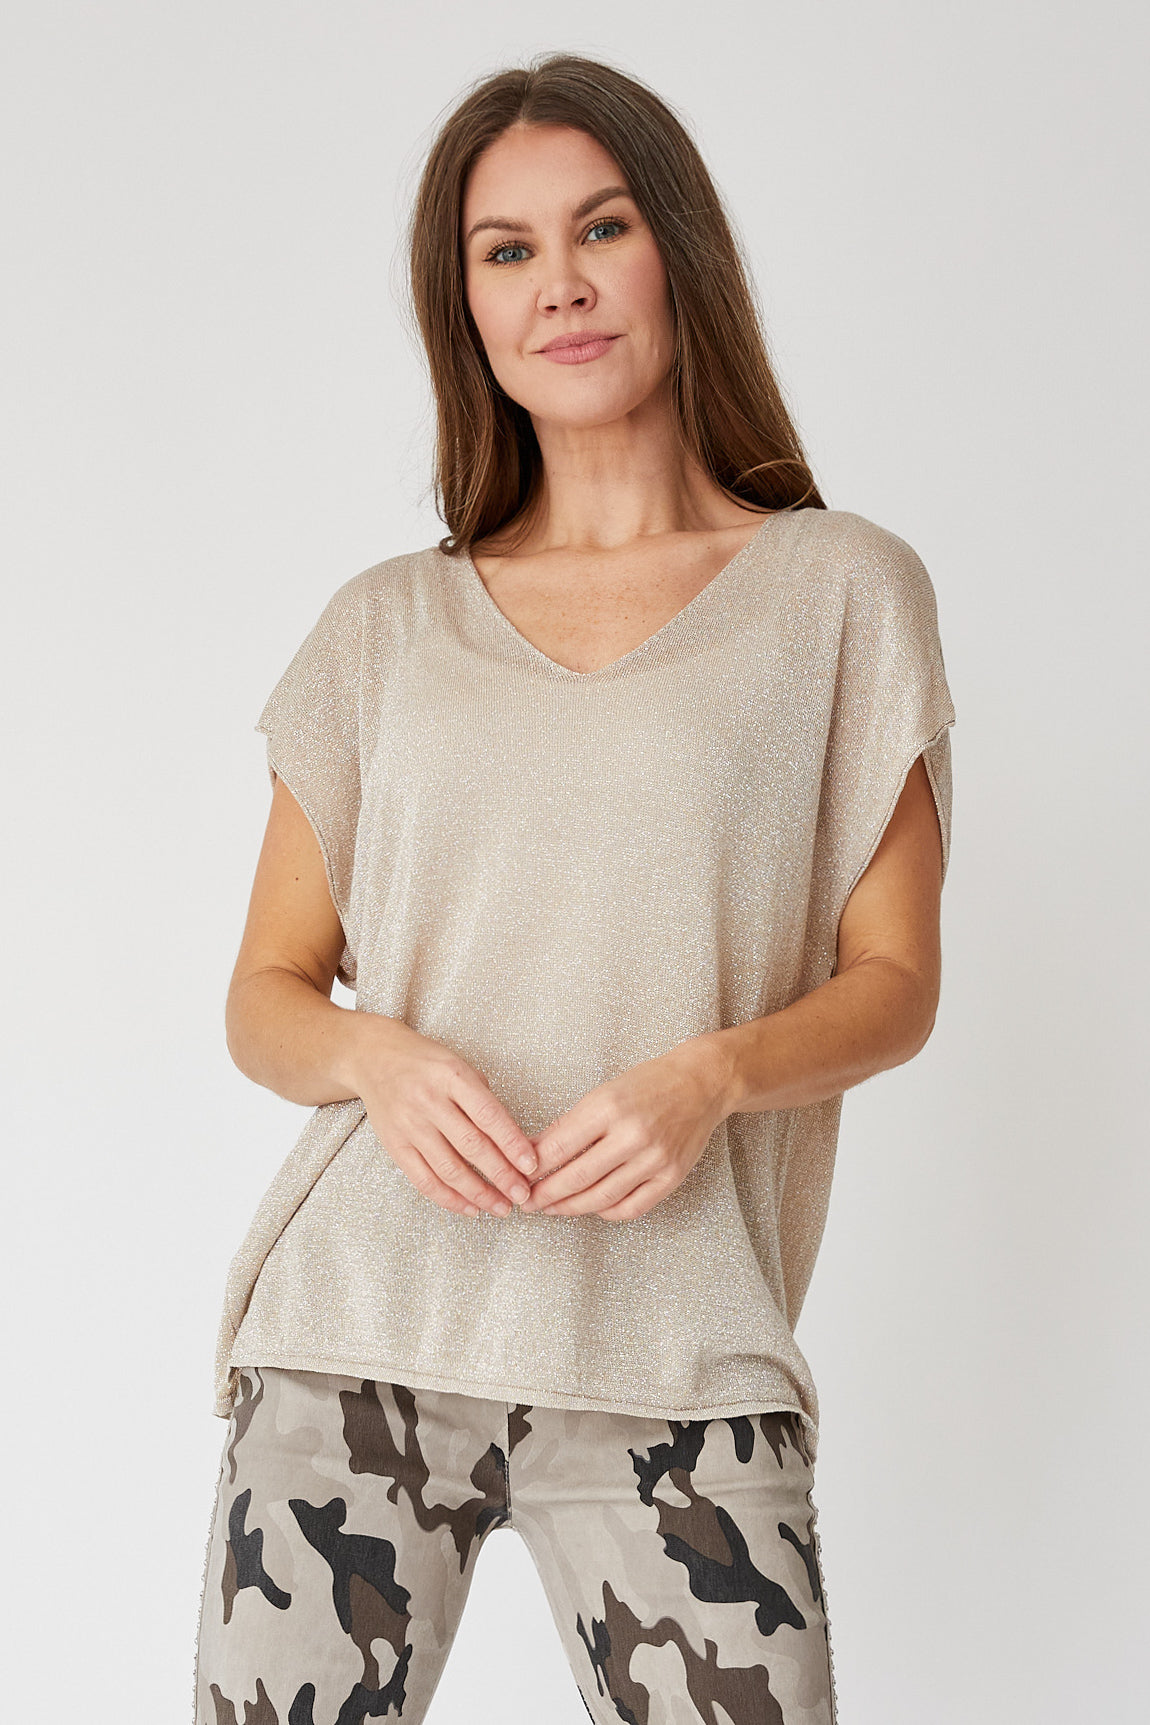 Shimmer Tee (Six Colors) - Jacqueline B Clothing